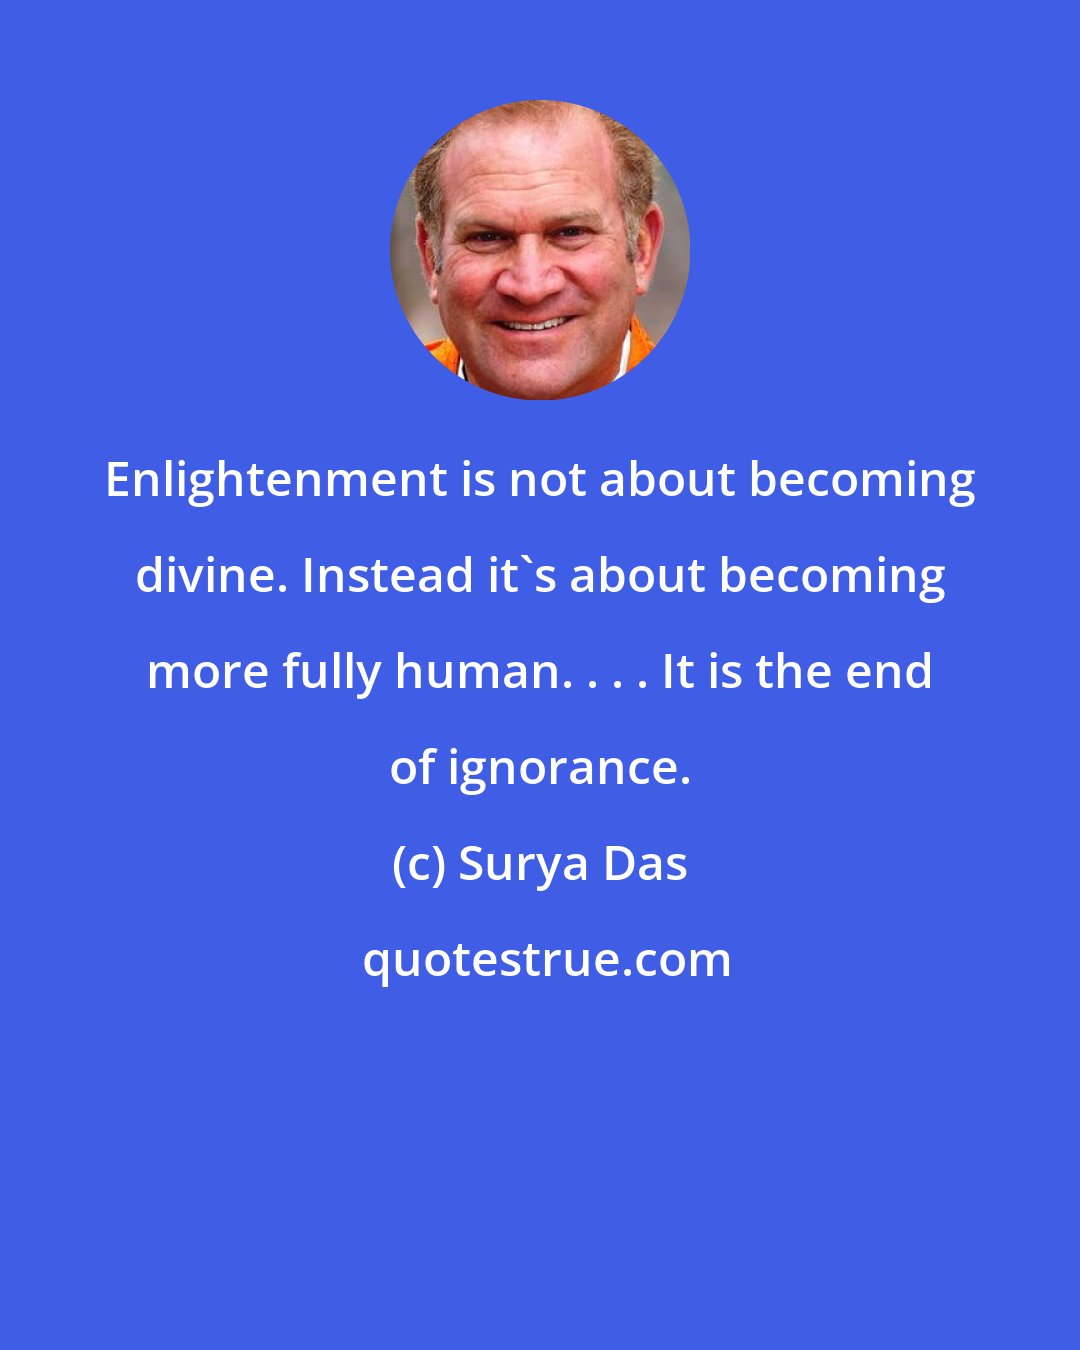 Surya Das: Enlightenment is not about becoming divine. Instead it's about becoming more fully human. . . . It is the end of ignorance.